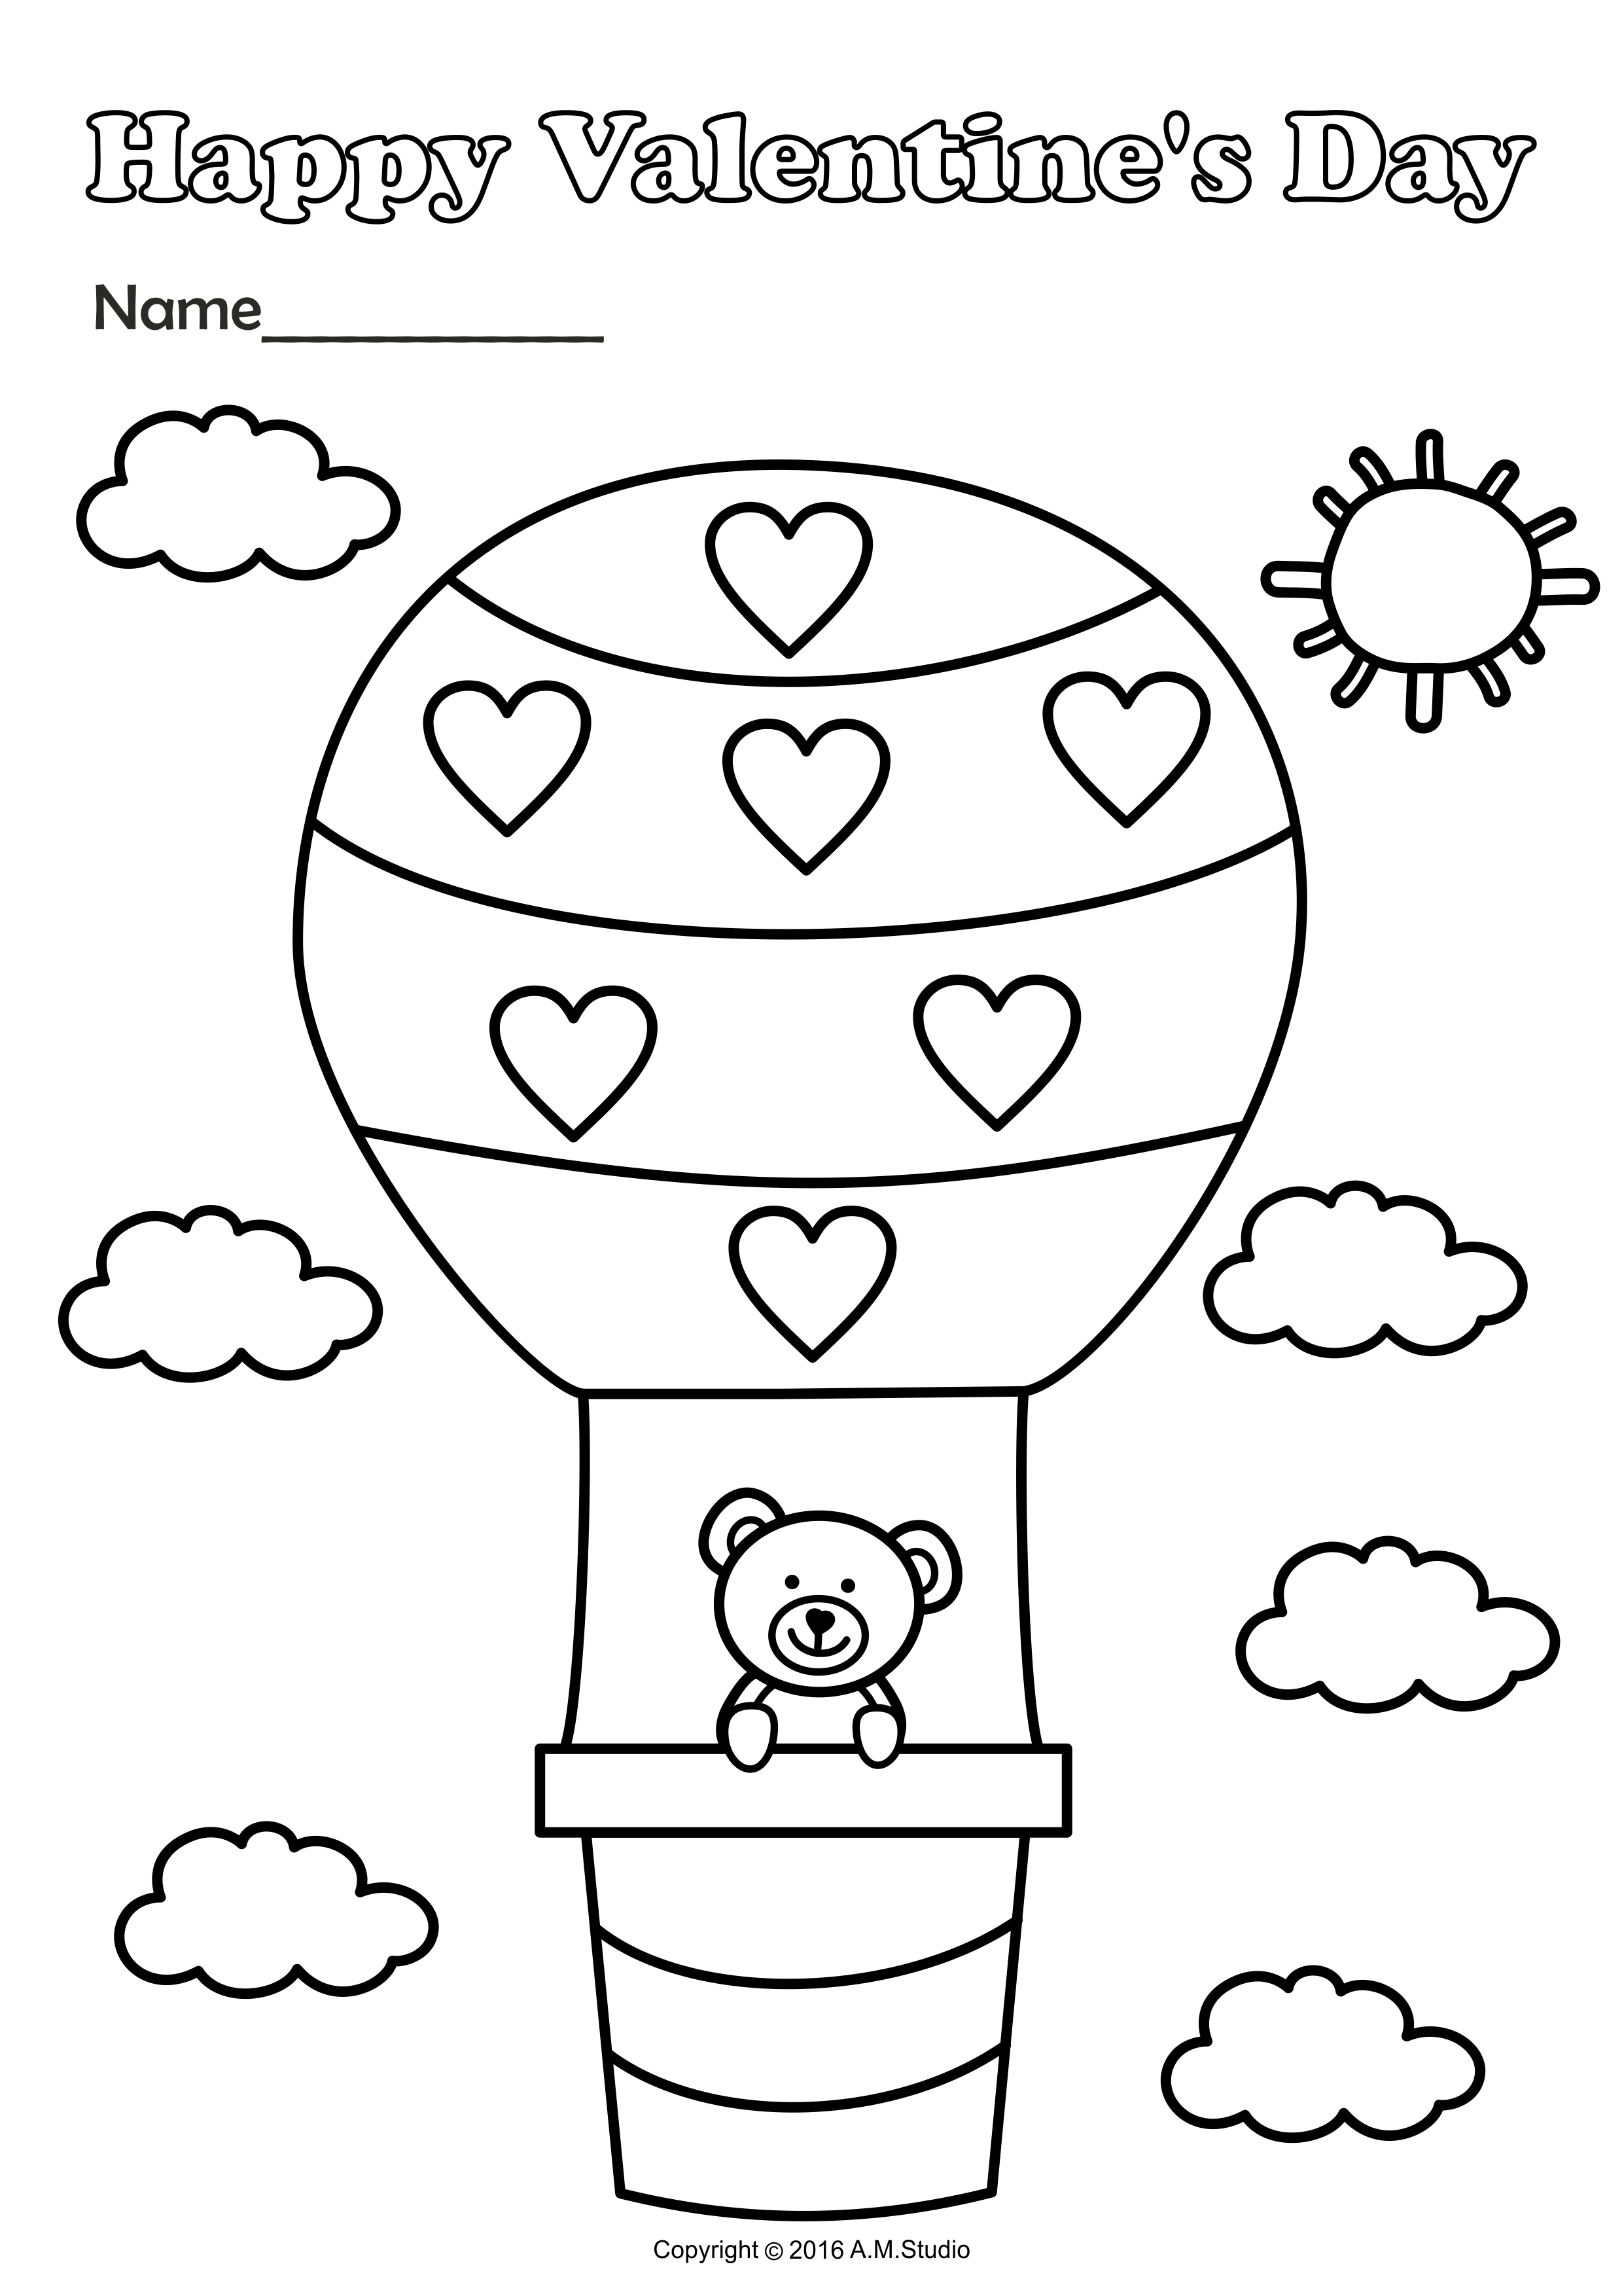 Valentine`s Day Printable Coloring Pages for Kids (img # 1)